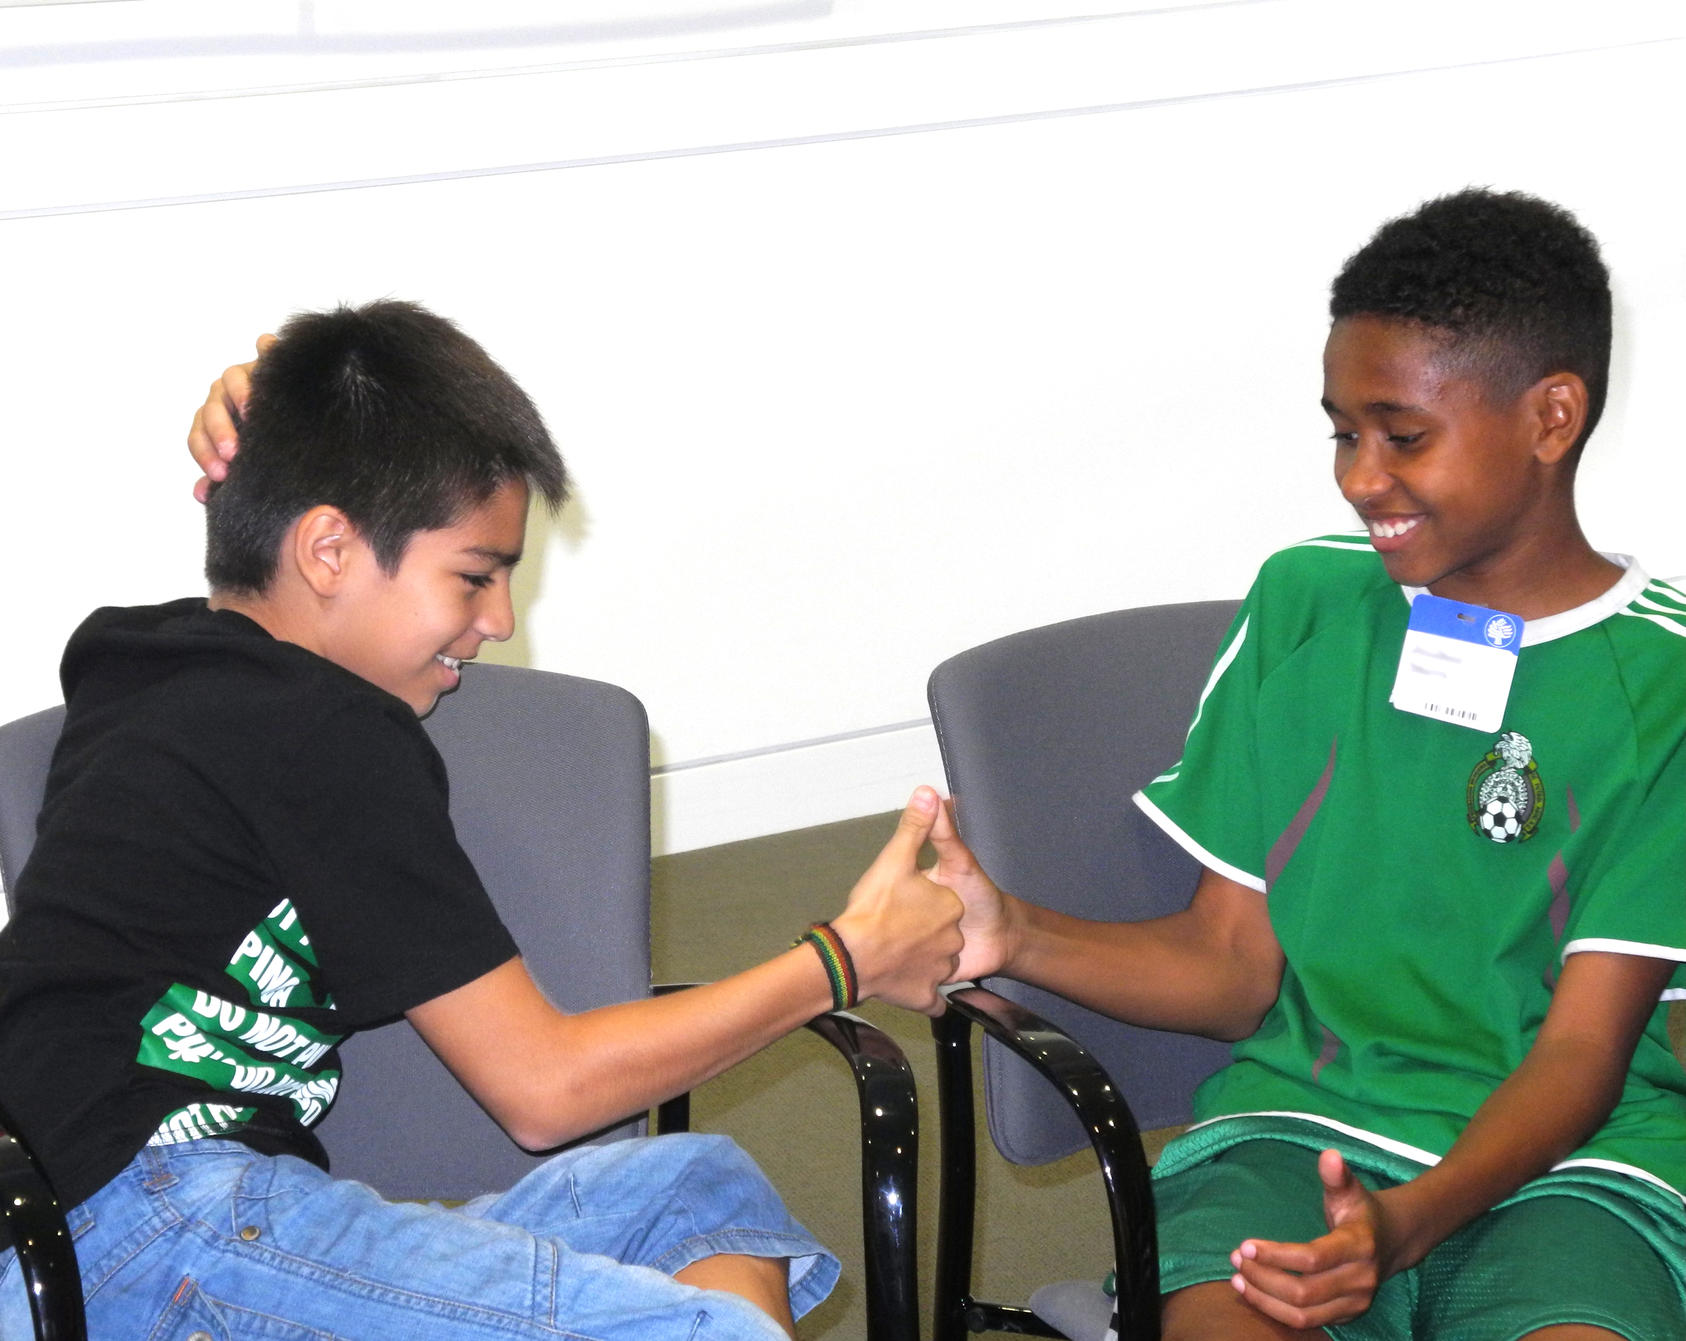 Students participating in the Thumb Wrestling: Competition Versus Cooperation activity at USIP.  